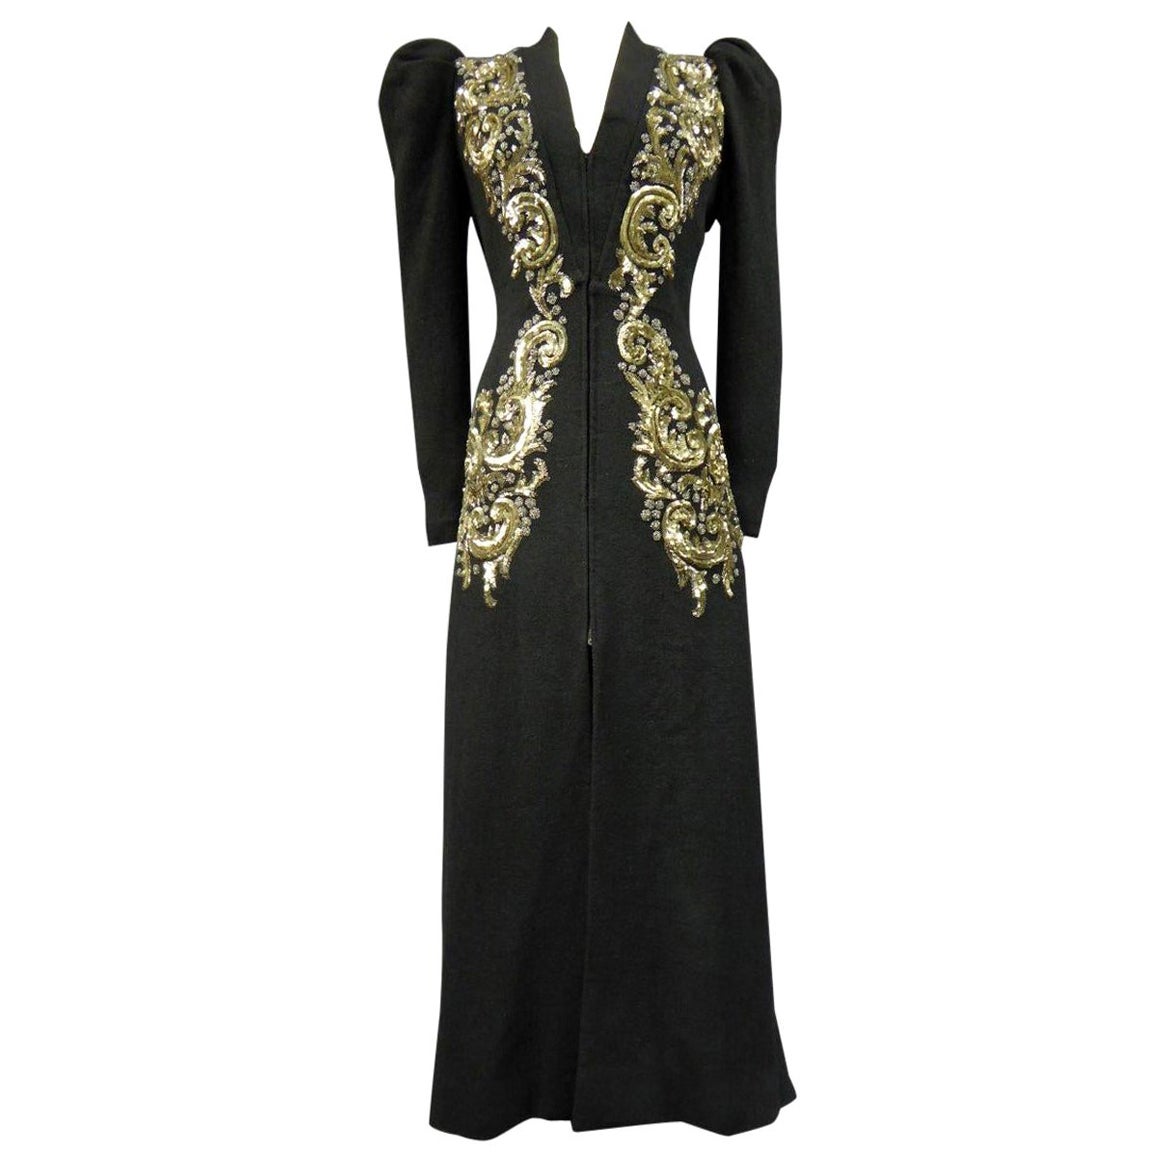 An Elsa Schiaparelli Woolen Embroidered Couture Evening Coat - France Circa 1939 For Sale